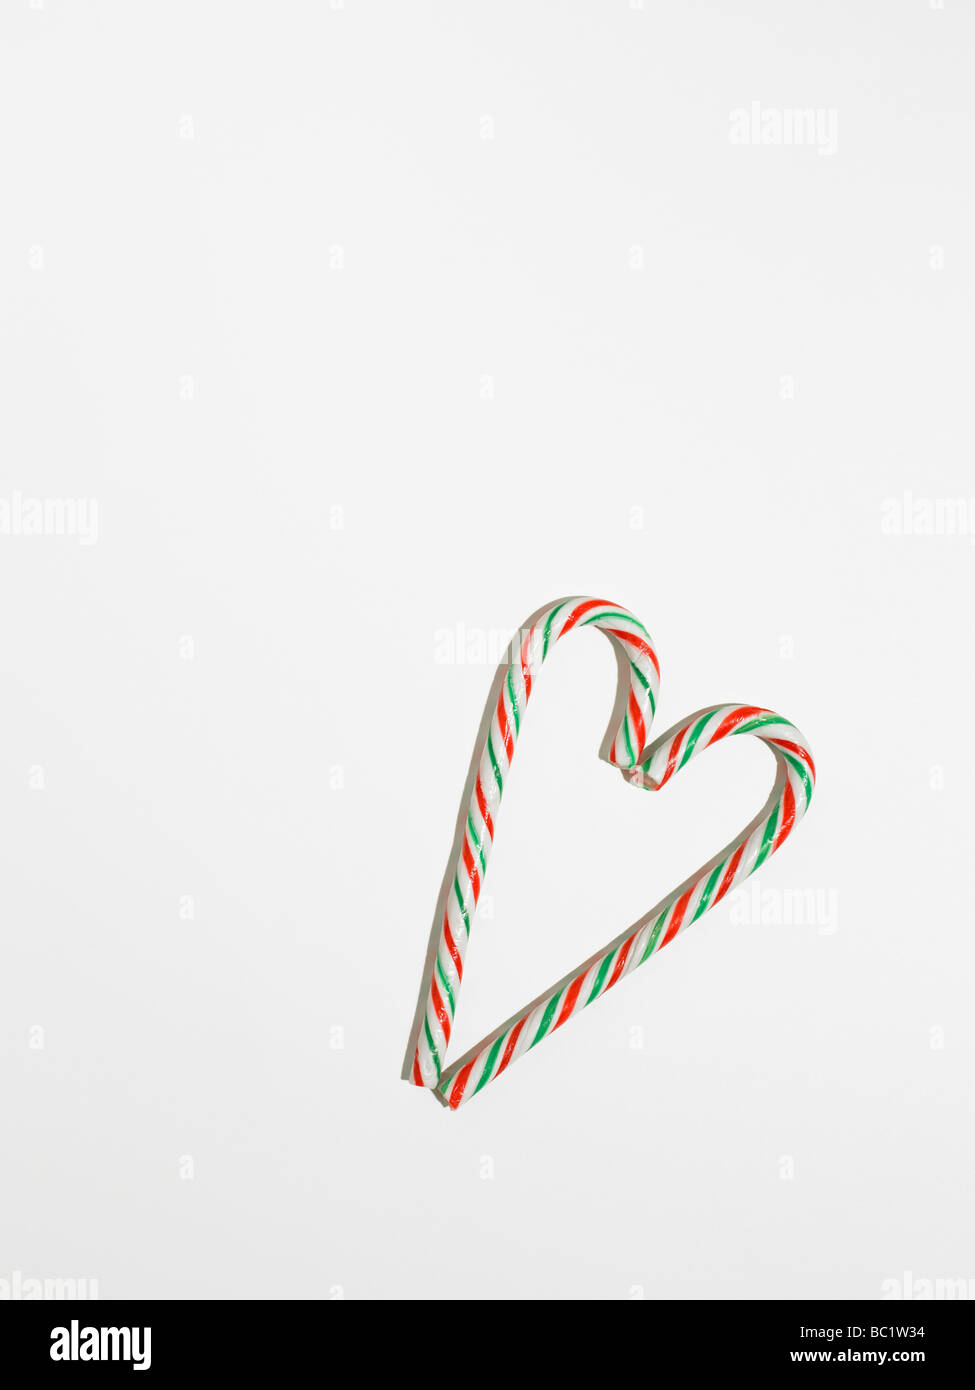 sticks of candy canes heart shaped Stock Photo